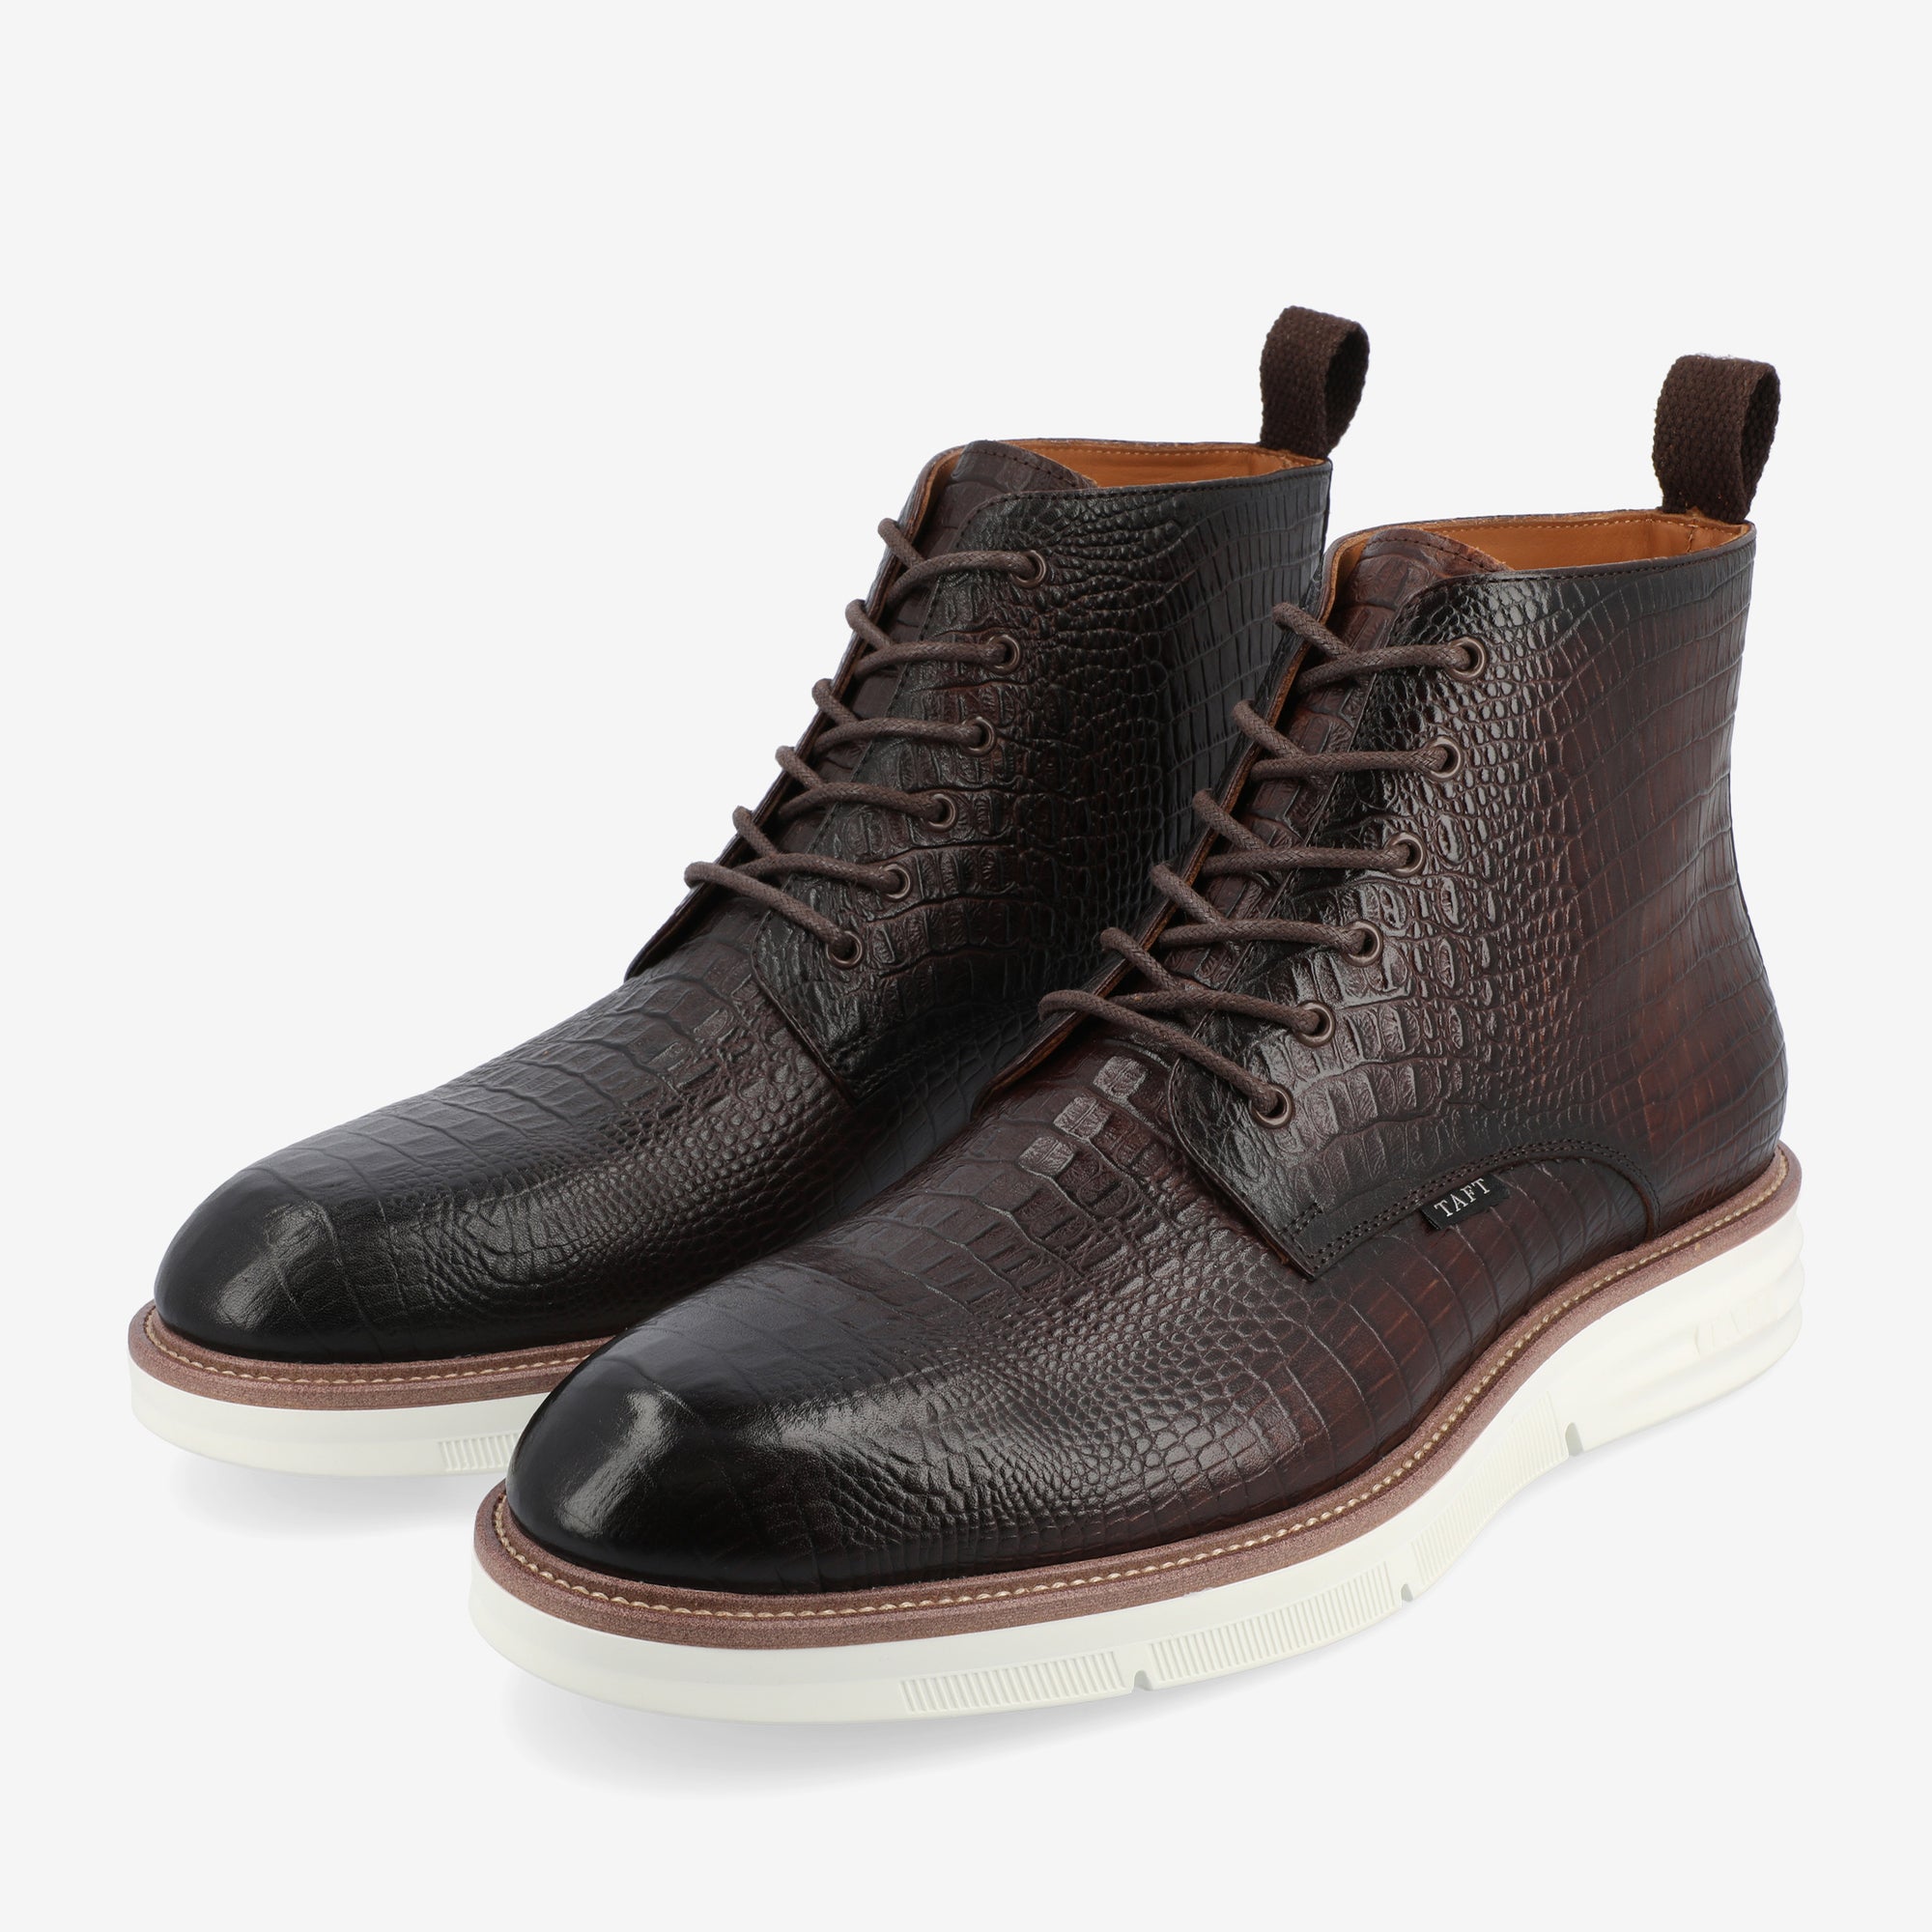 Model 009 Boot In Chocolate